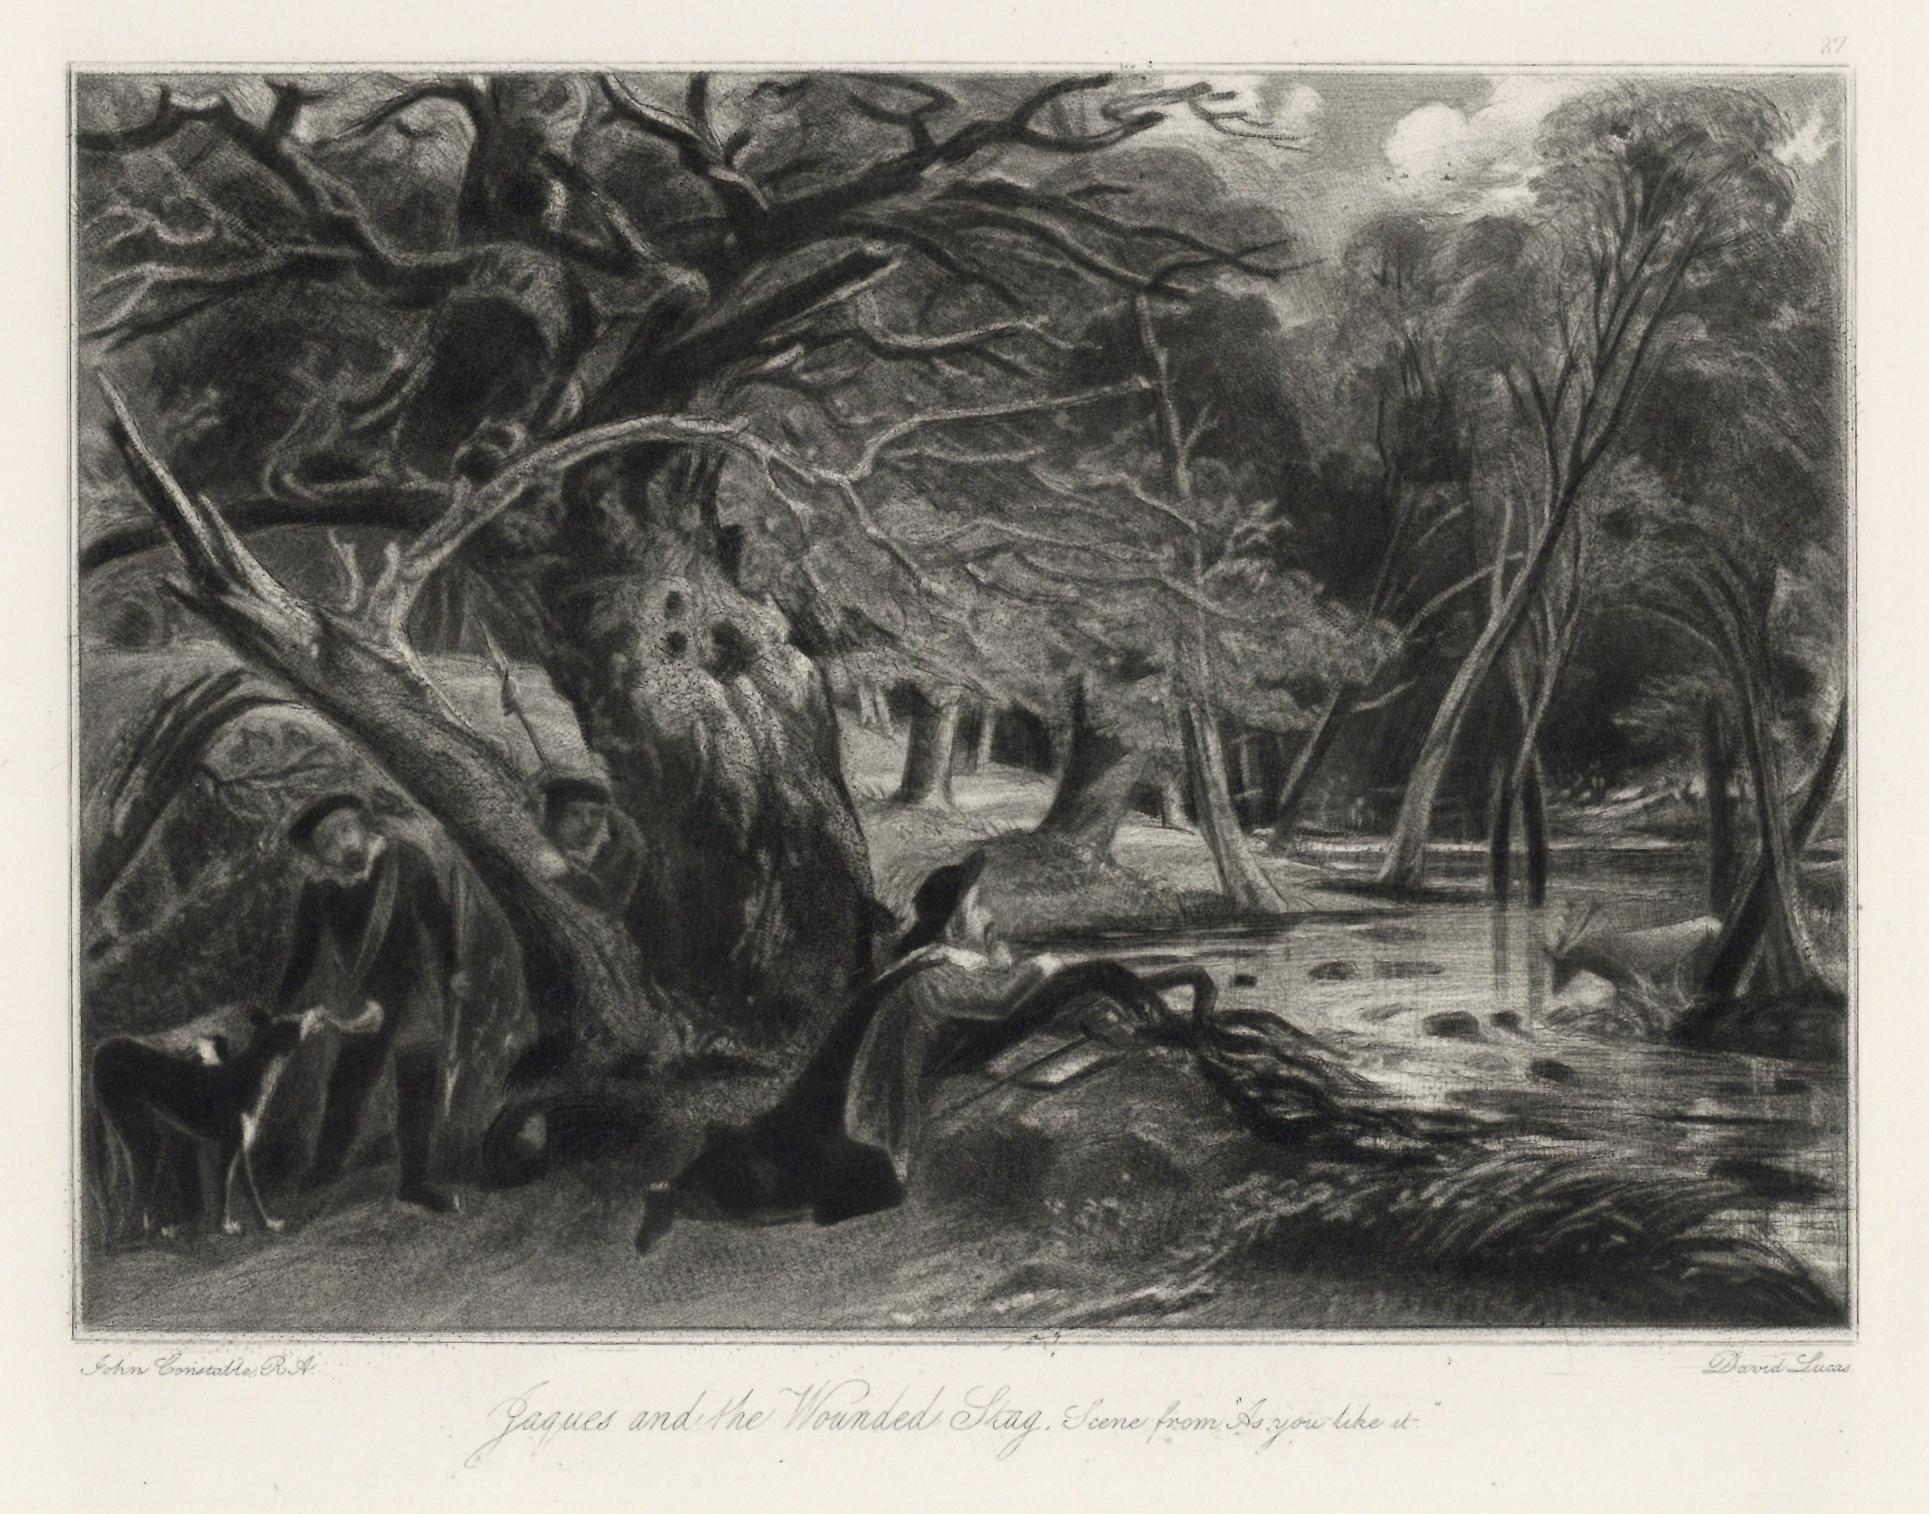 David Lucas Landscape Print - (after) John Constable mezzotint "Jacques and the Wounded Stag"